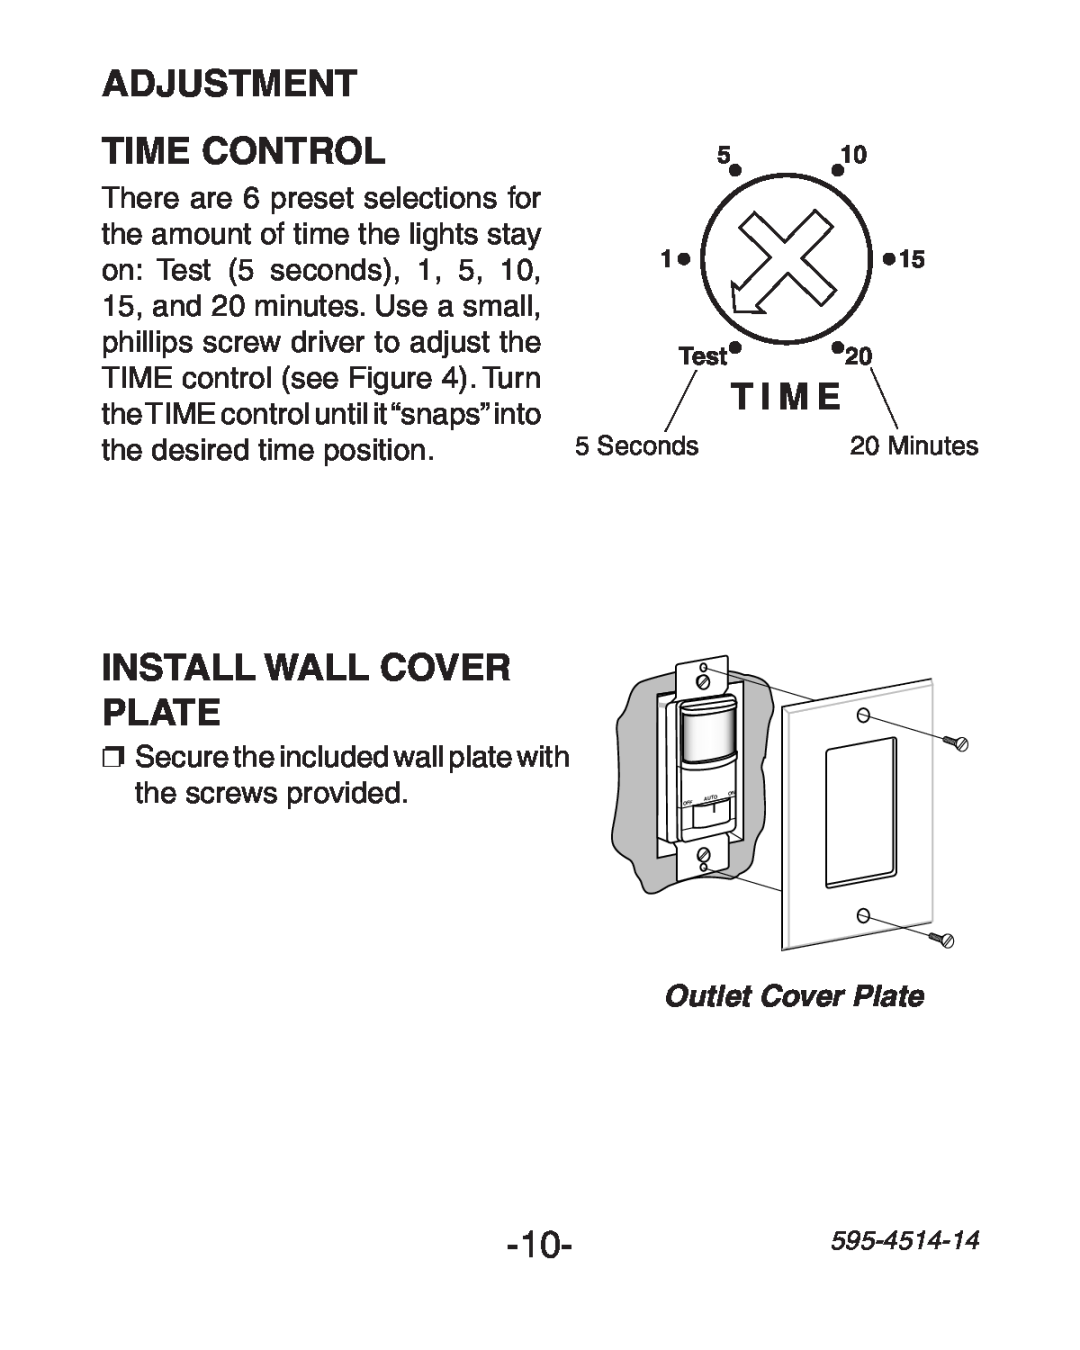 Heath Zenith SL-6107 manual ADJUSTMENT Time Control, T I M E, Install Wall Cover Plate, Outlet Cover Plate, 5 115 Test20 